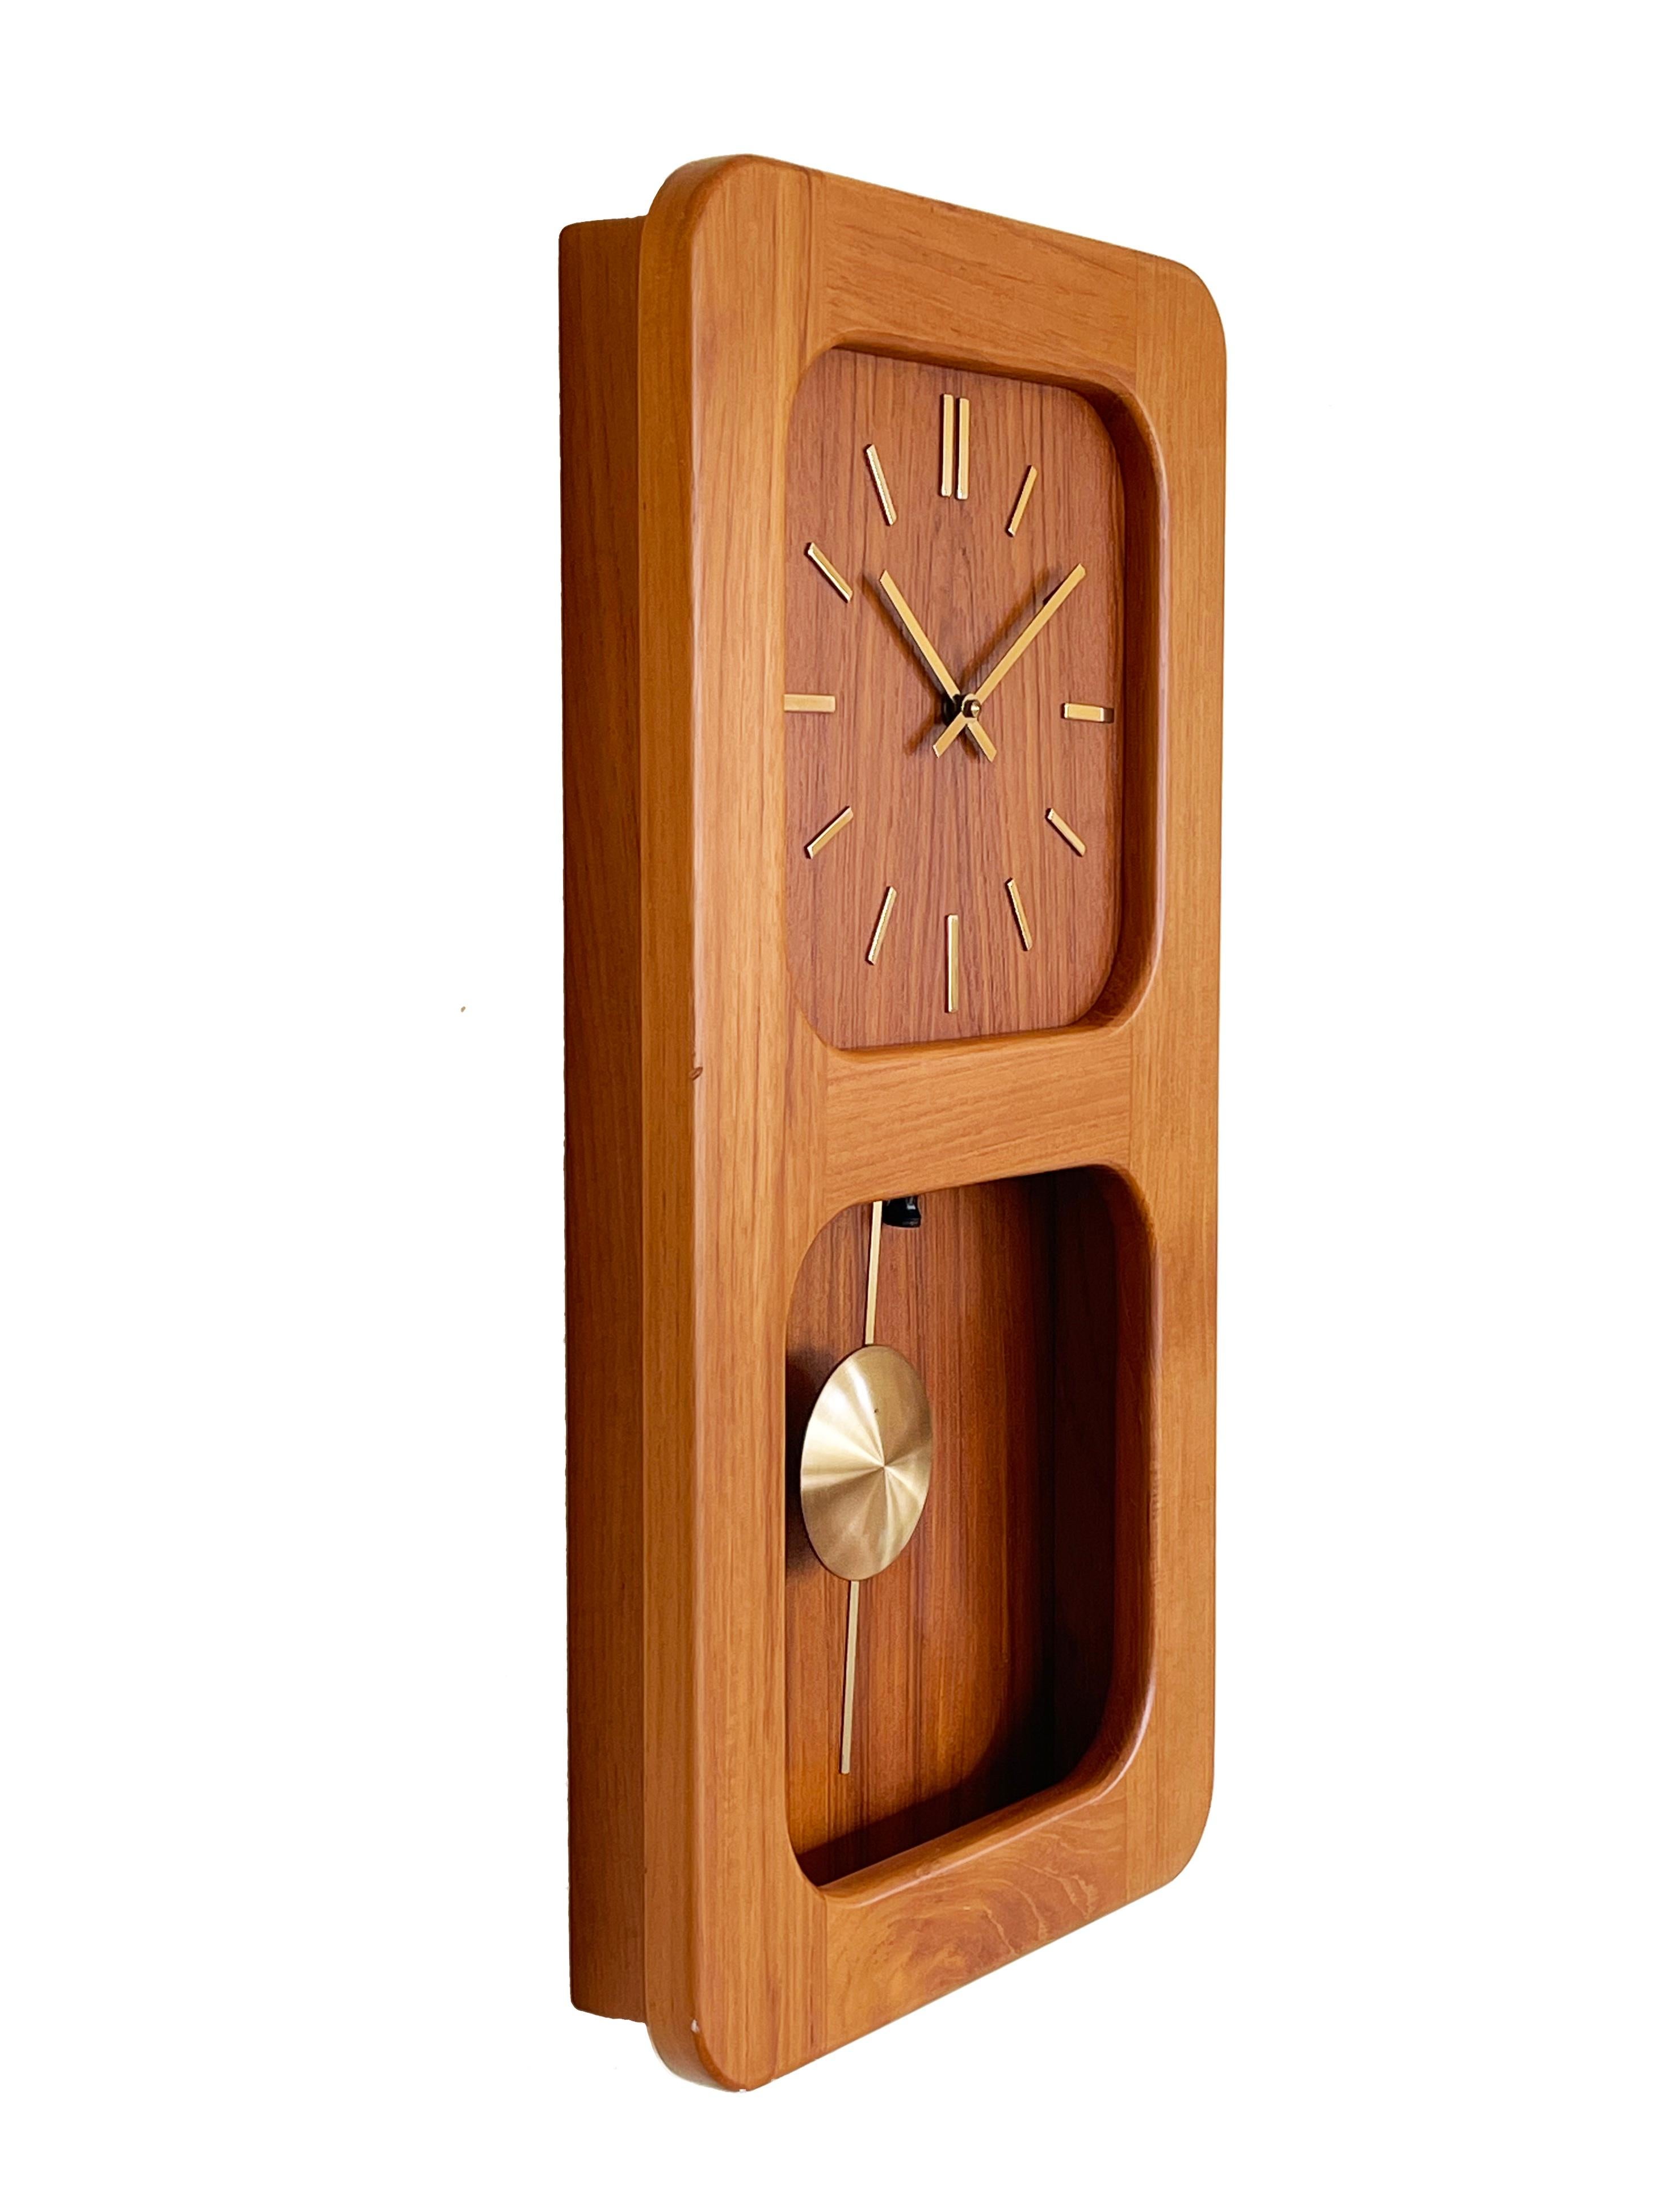 Absolutely fantastic mid-century clock made from teak, with a brass pendulum by Westminster Clocks.
Beautiful newly oiled case in a typical Danish minimalist design.
Westminster Clocks in Copenhagen chose here the actual Westminster chime at every